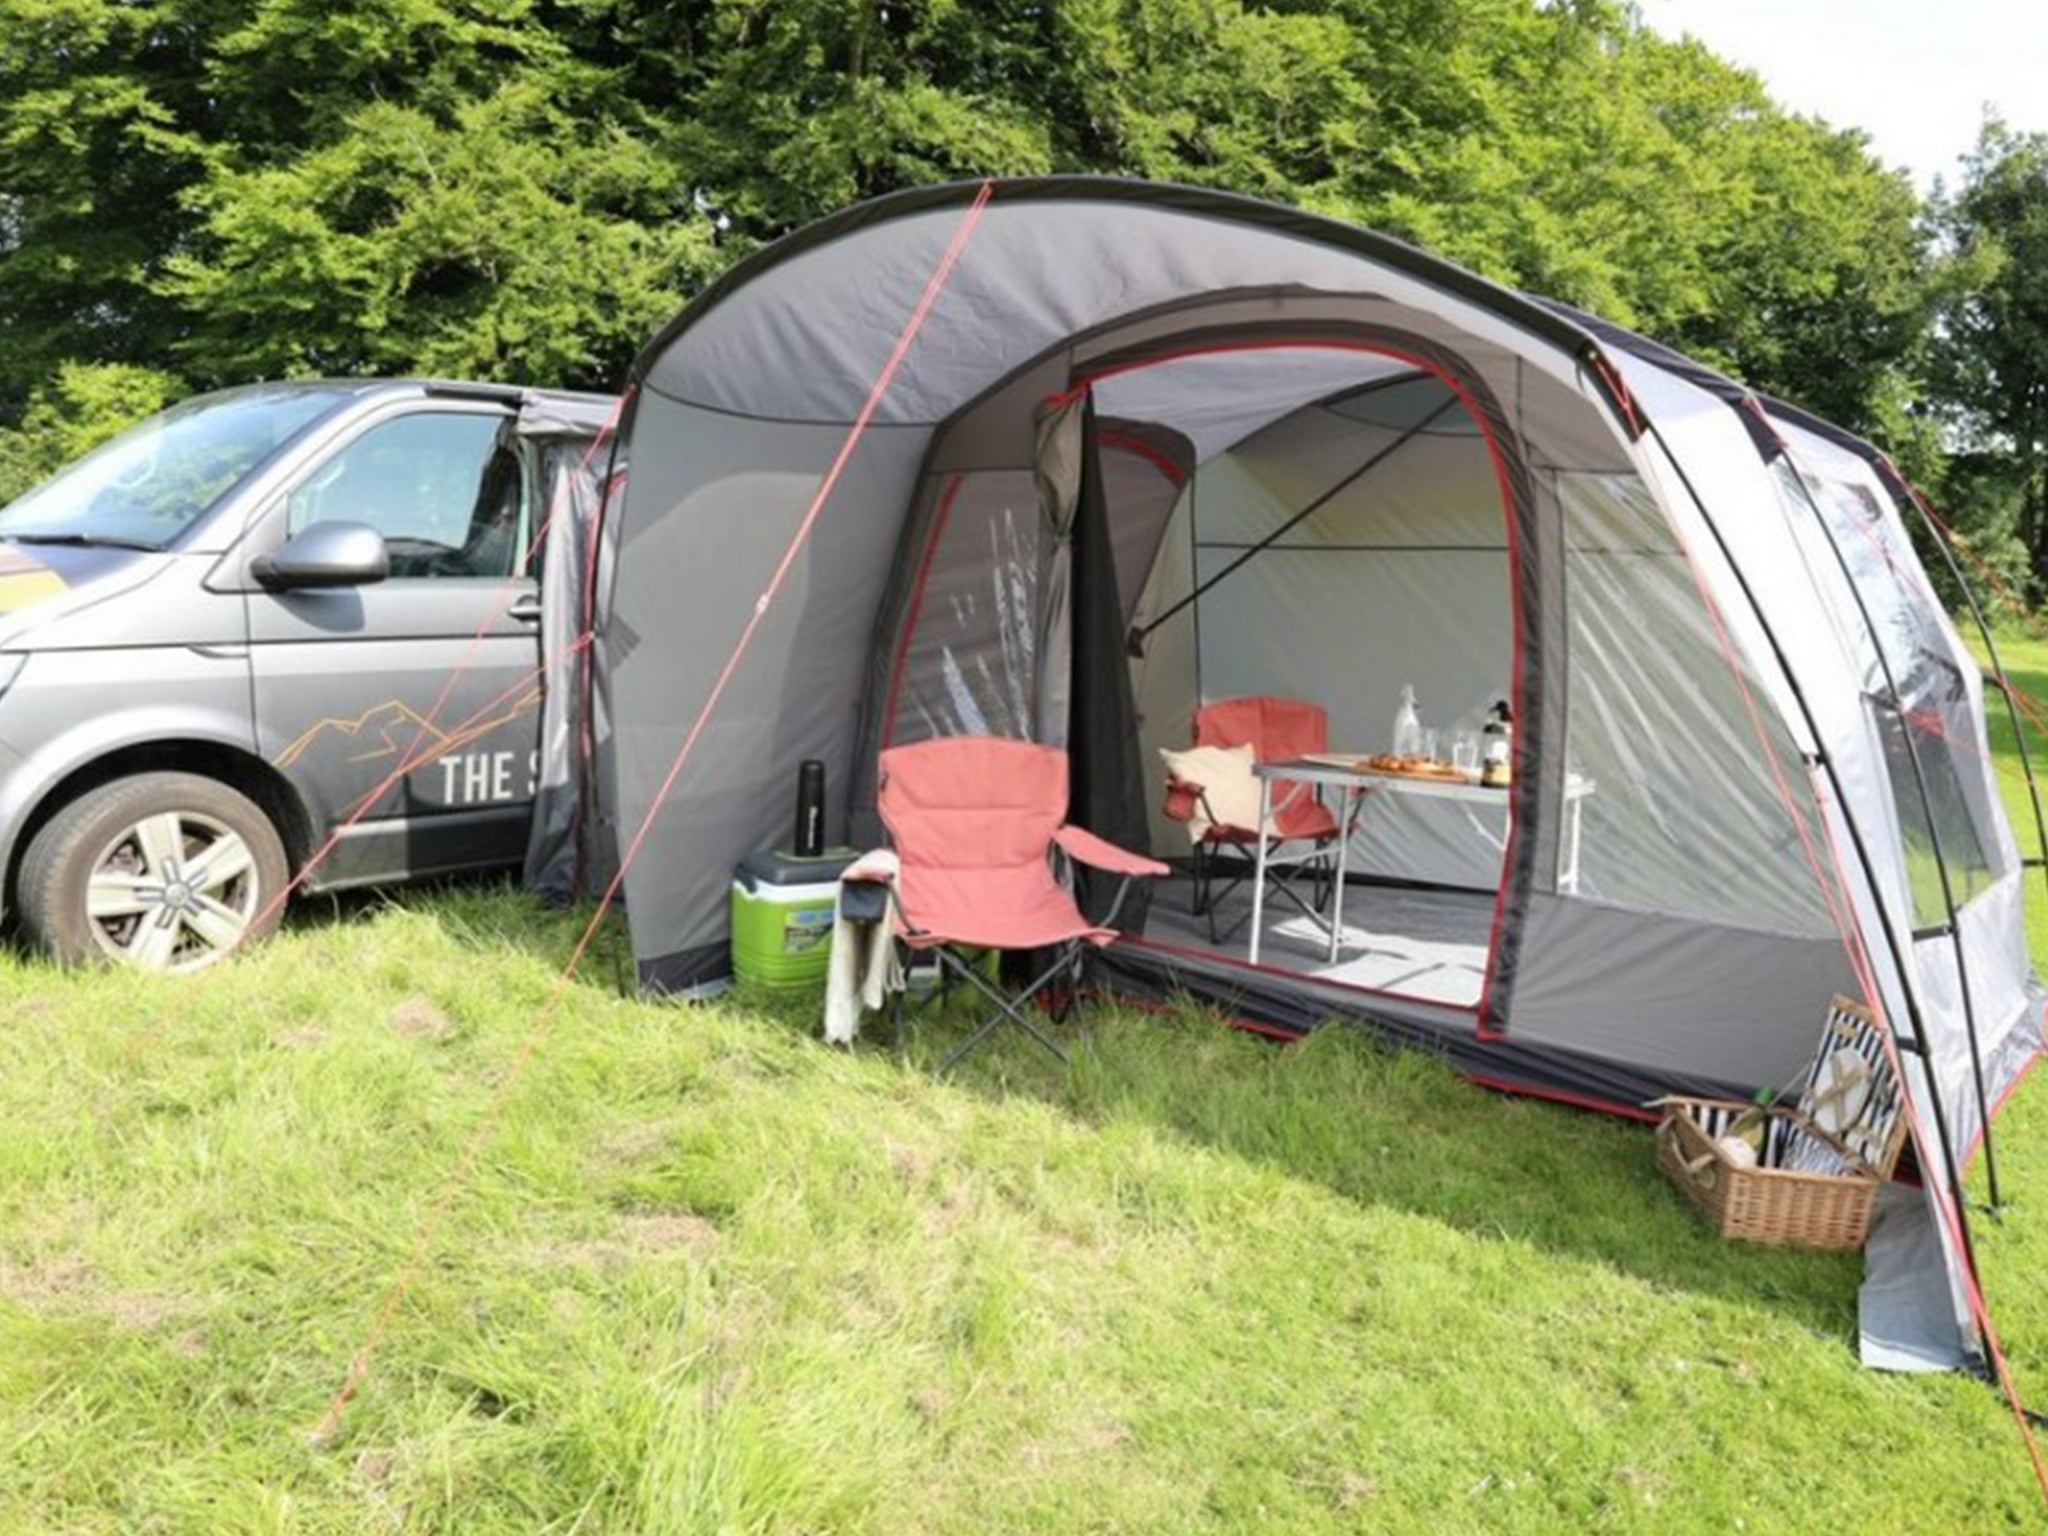 https://static.independent.co.uk/2022/04/29/09/Outwell%20woodcrest%20tailgate%20awning.jpg